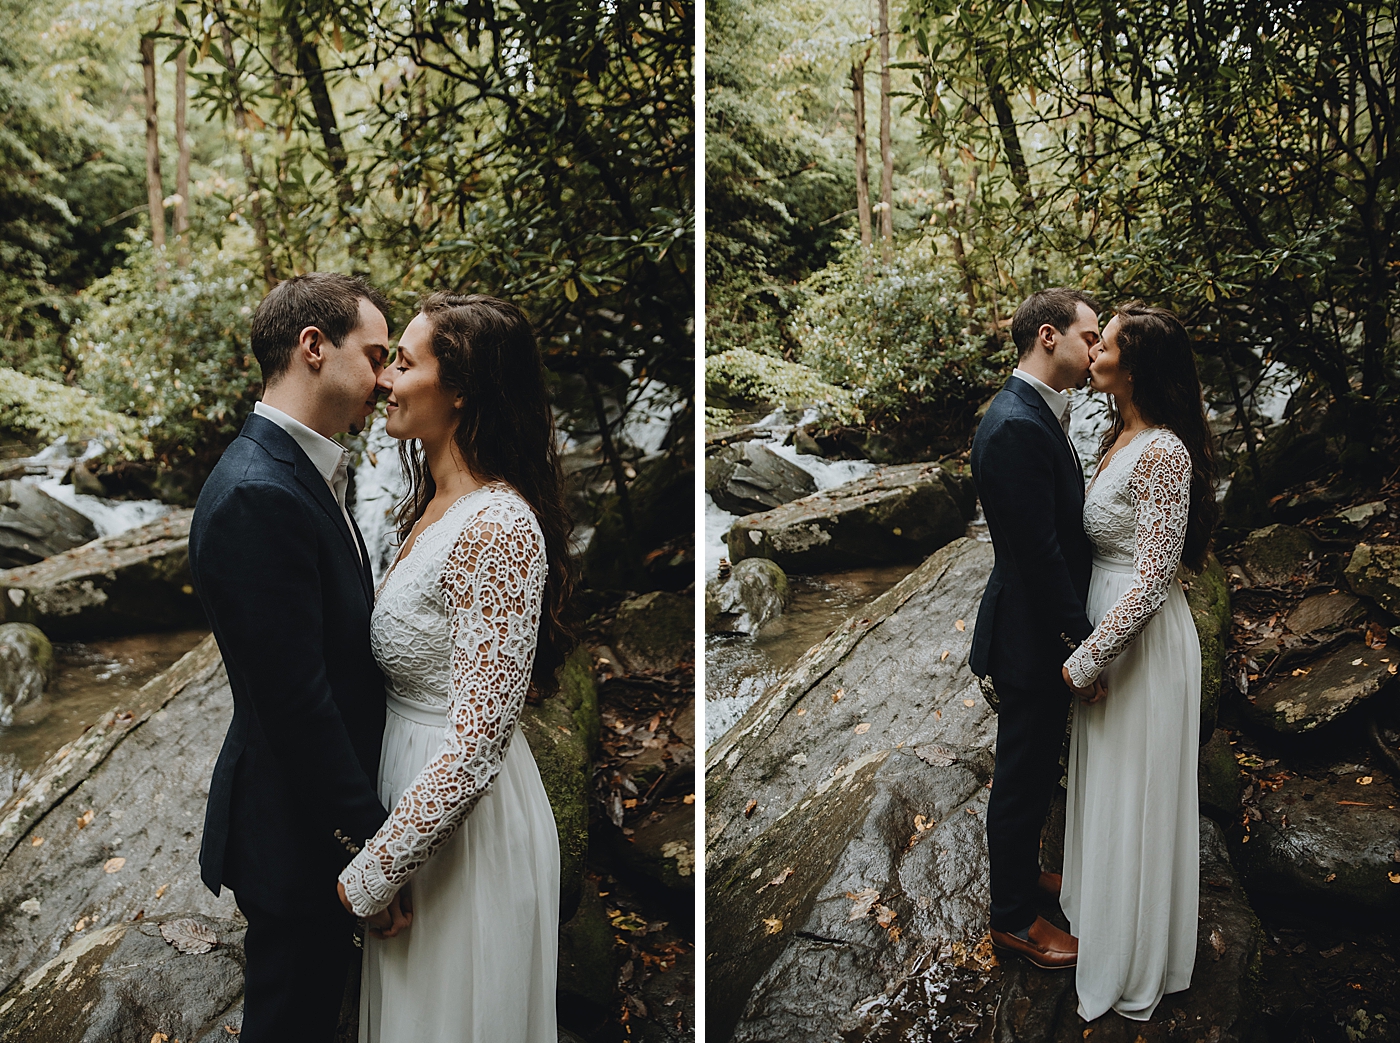 Bride and Groom kissing on wet rocks in the forest Catawba Falls Asheville, NC Elopement Photography captured by Maggie Alvarez Photography